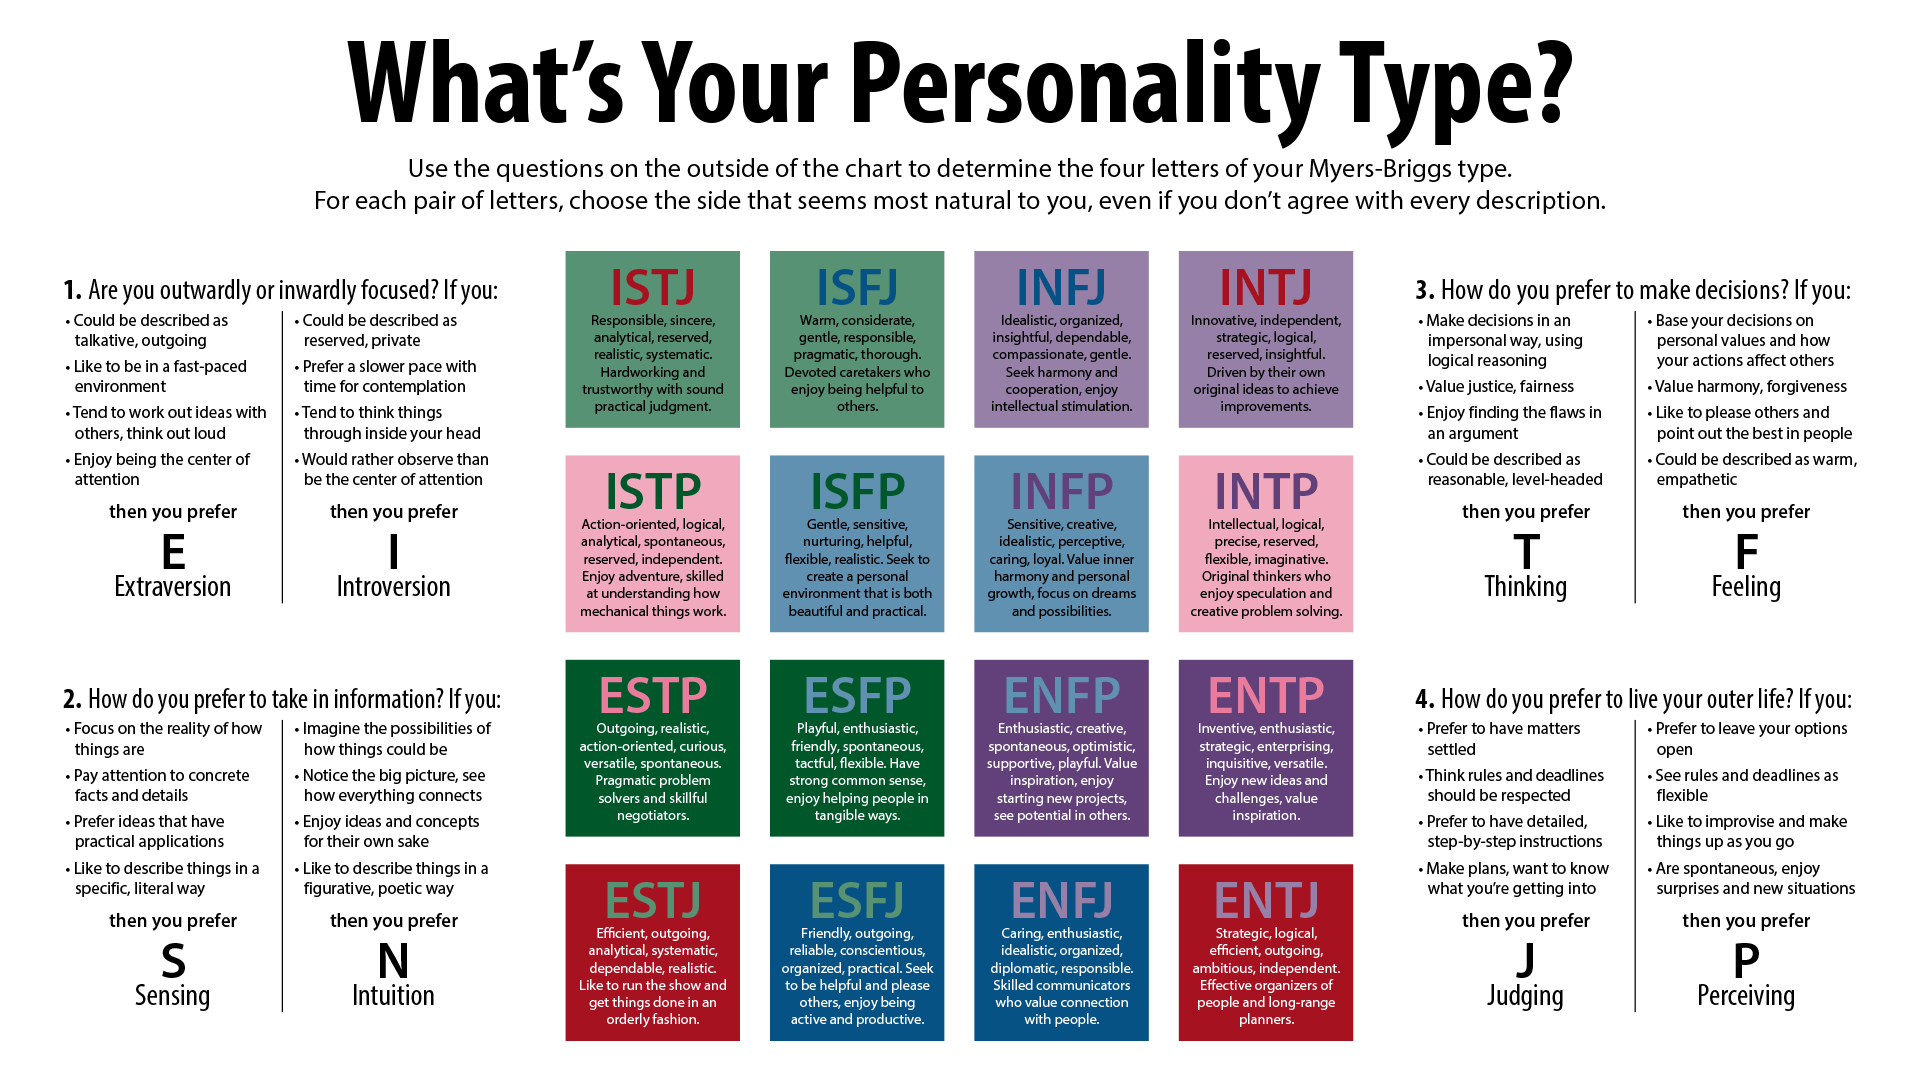 Personality Types - Find Yours here